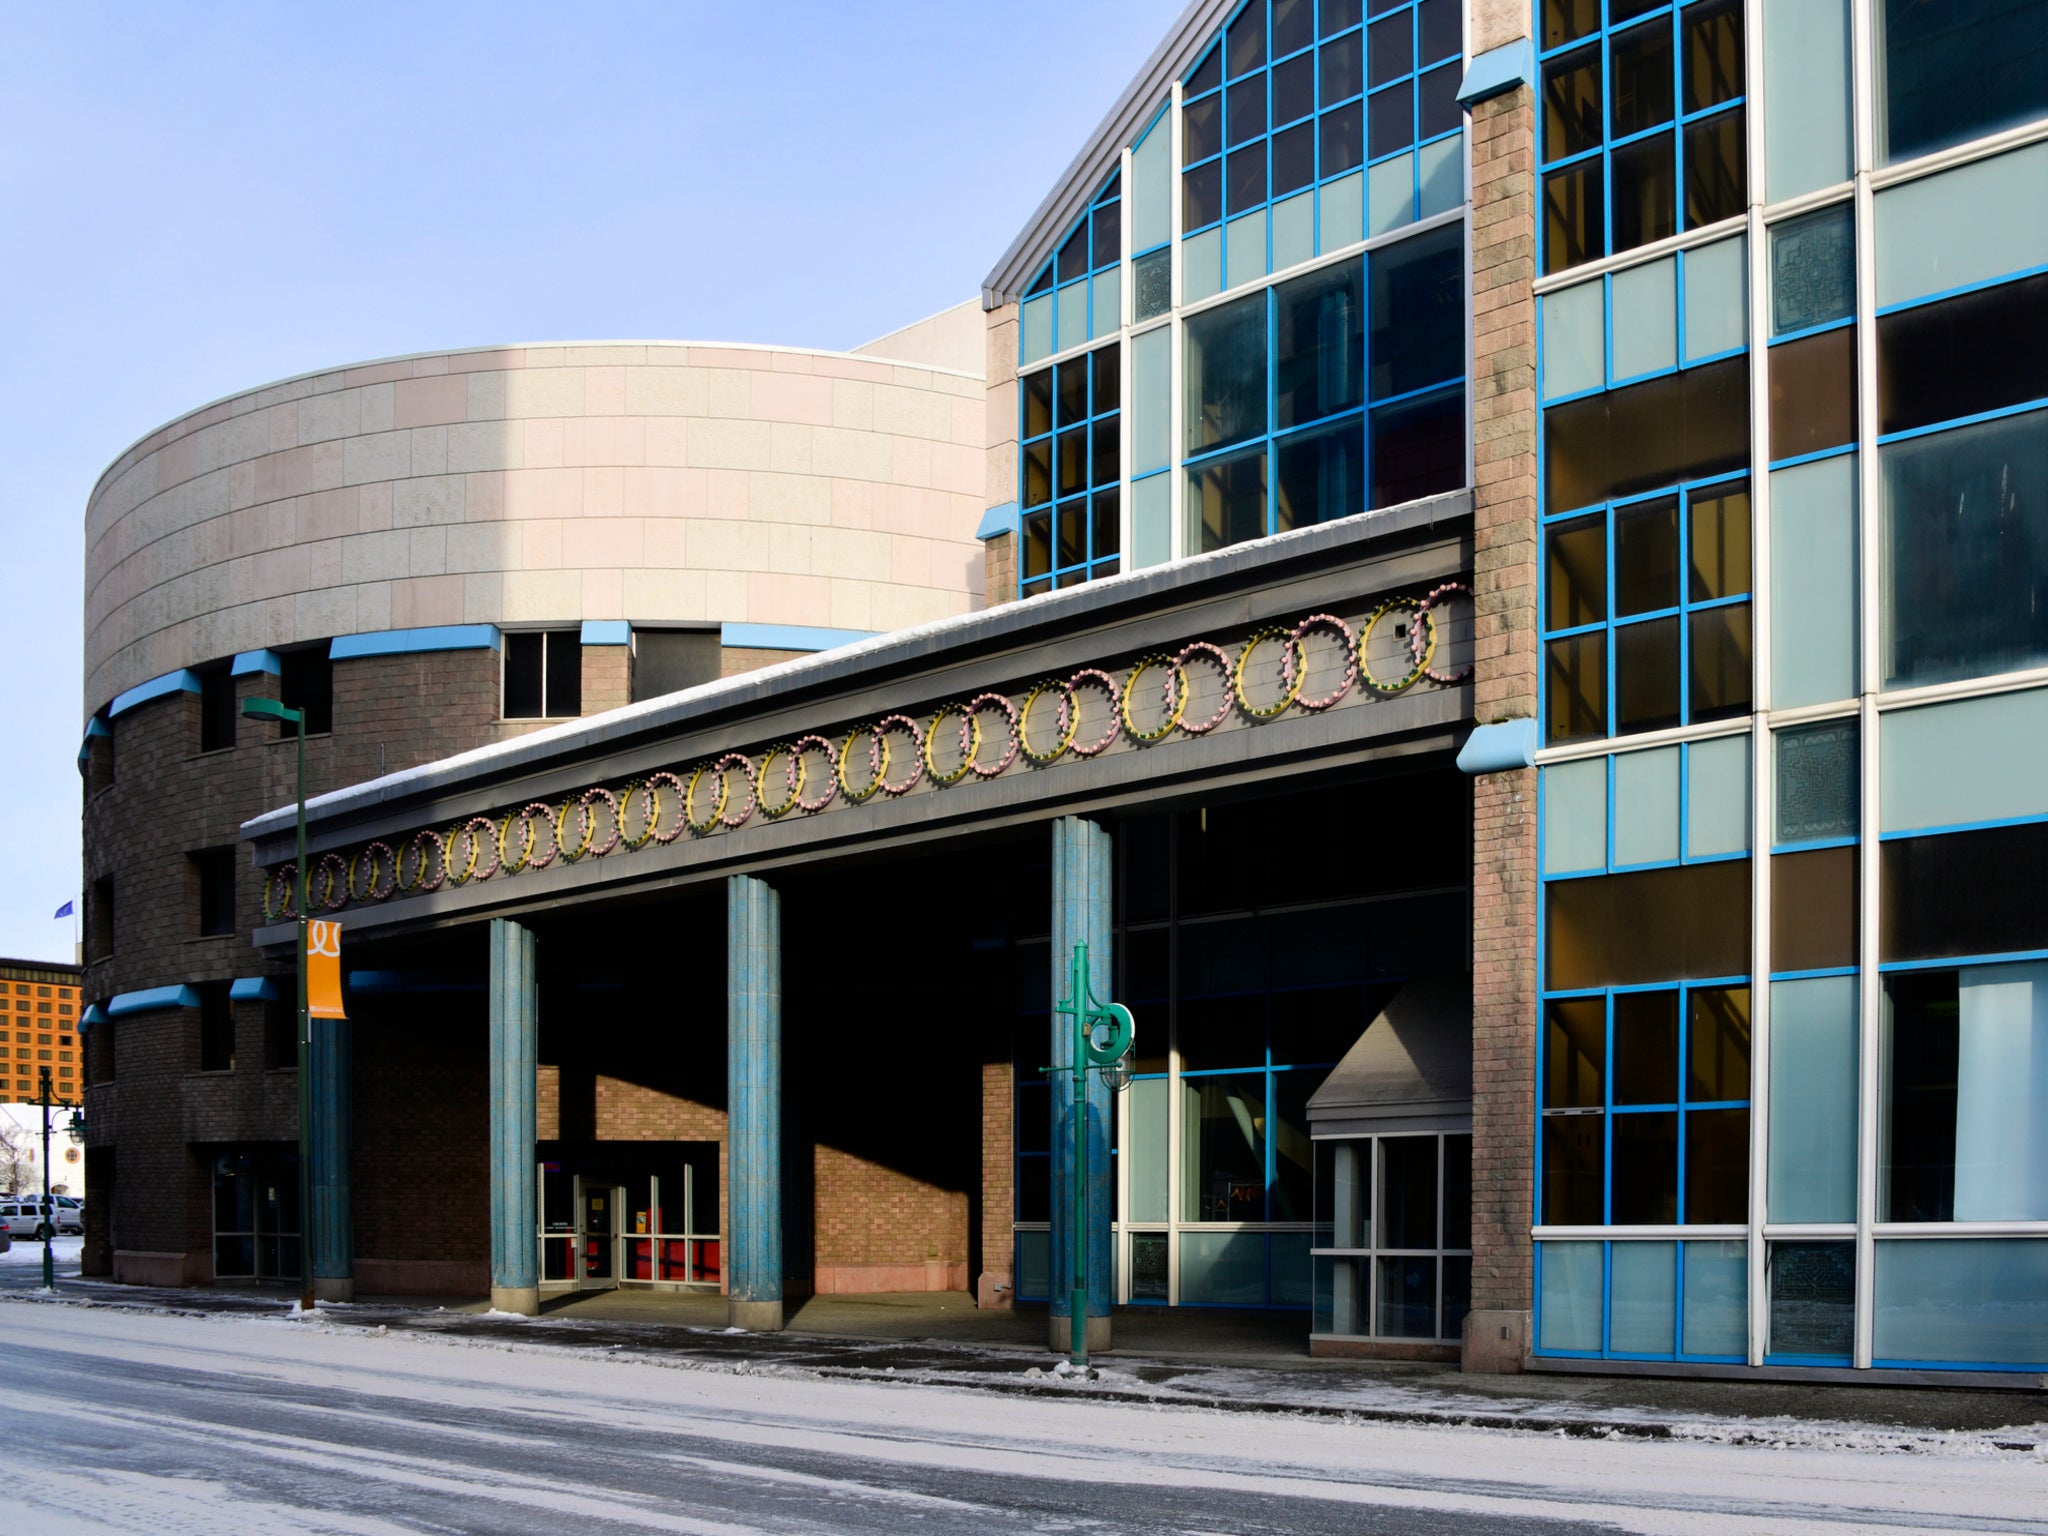 The Alaska center for the performing arts is one of Anchorage’s architectural highlights